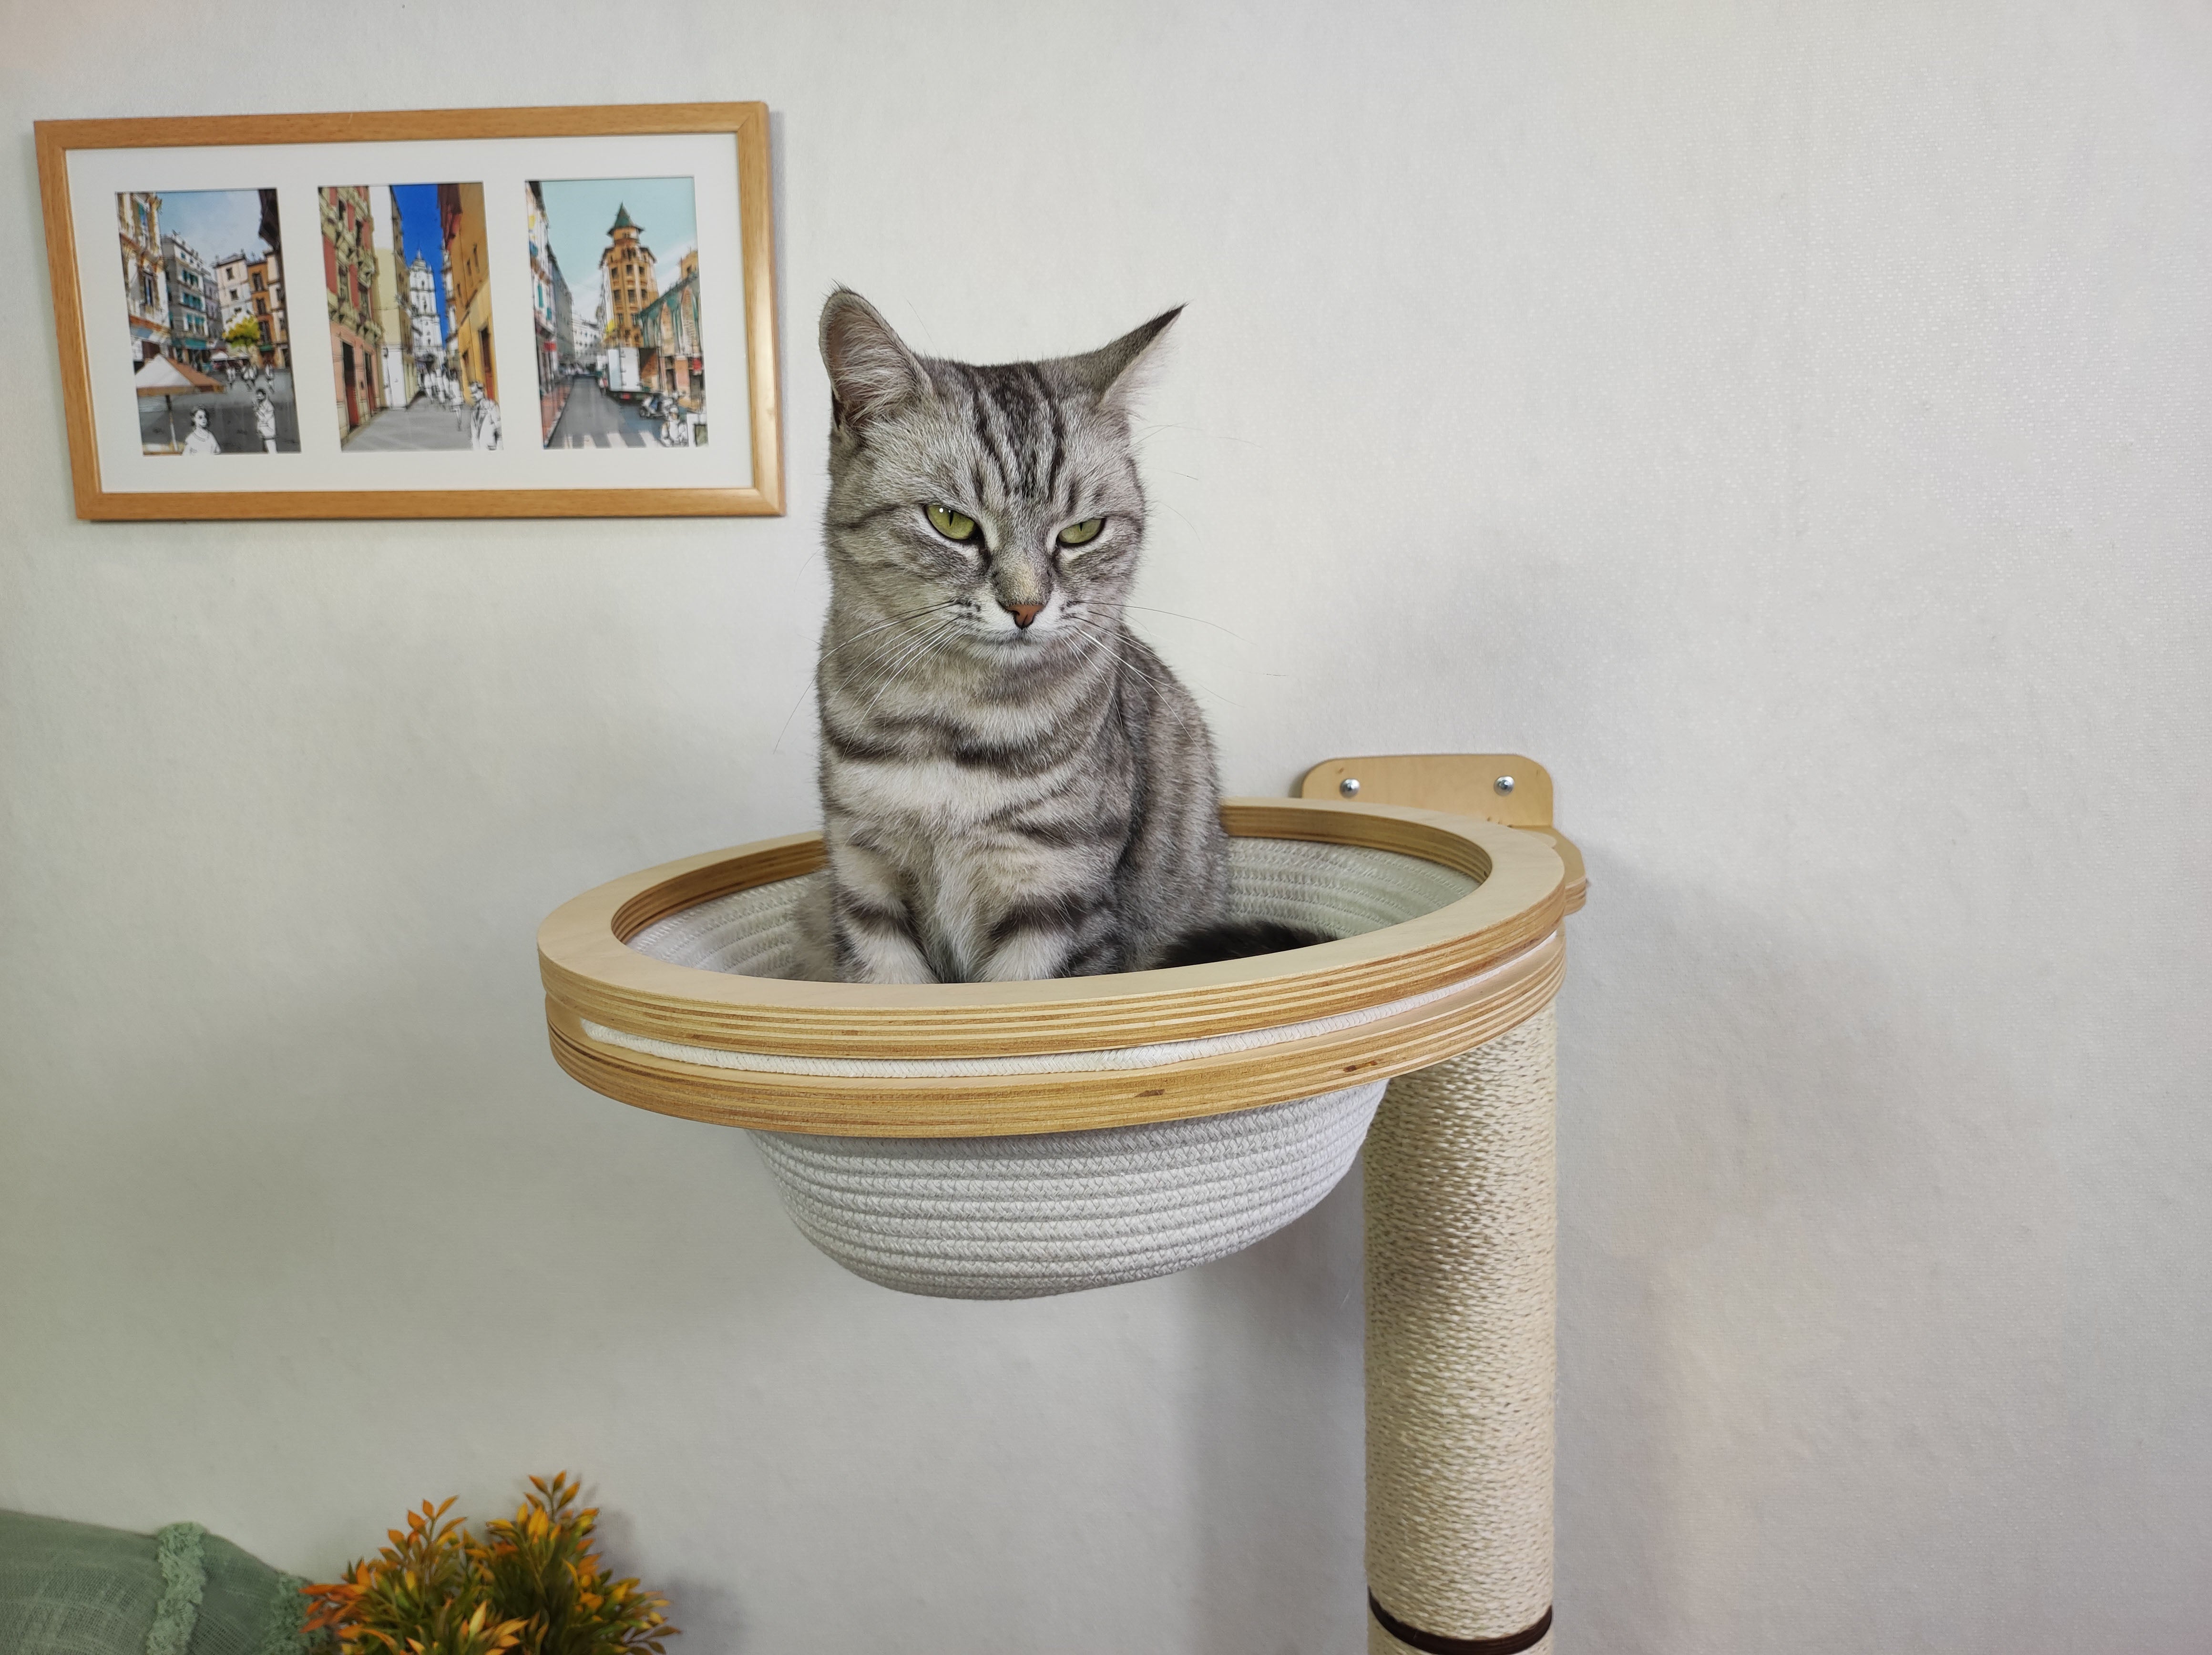 Wall-mounted round basket made of cotton thread for a cat made of light wood